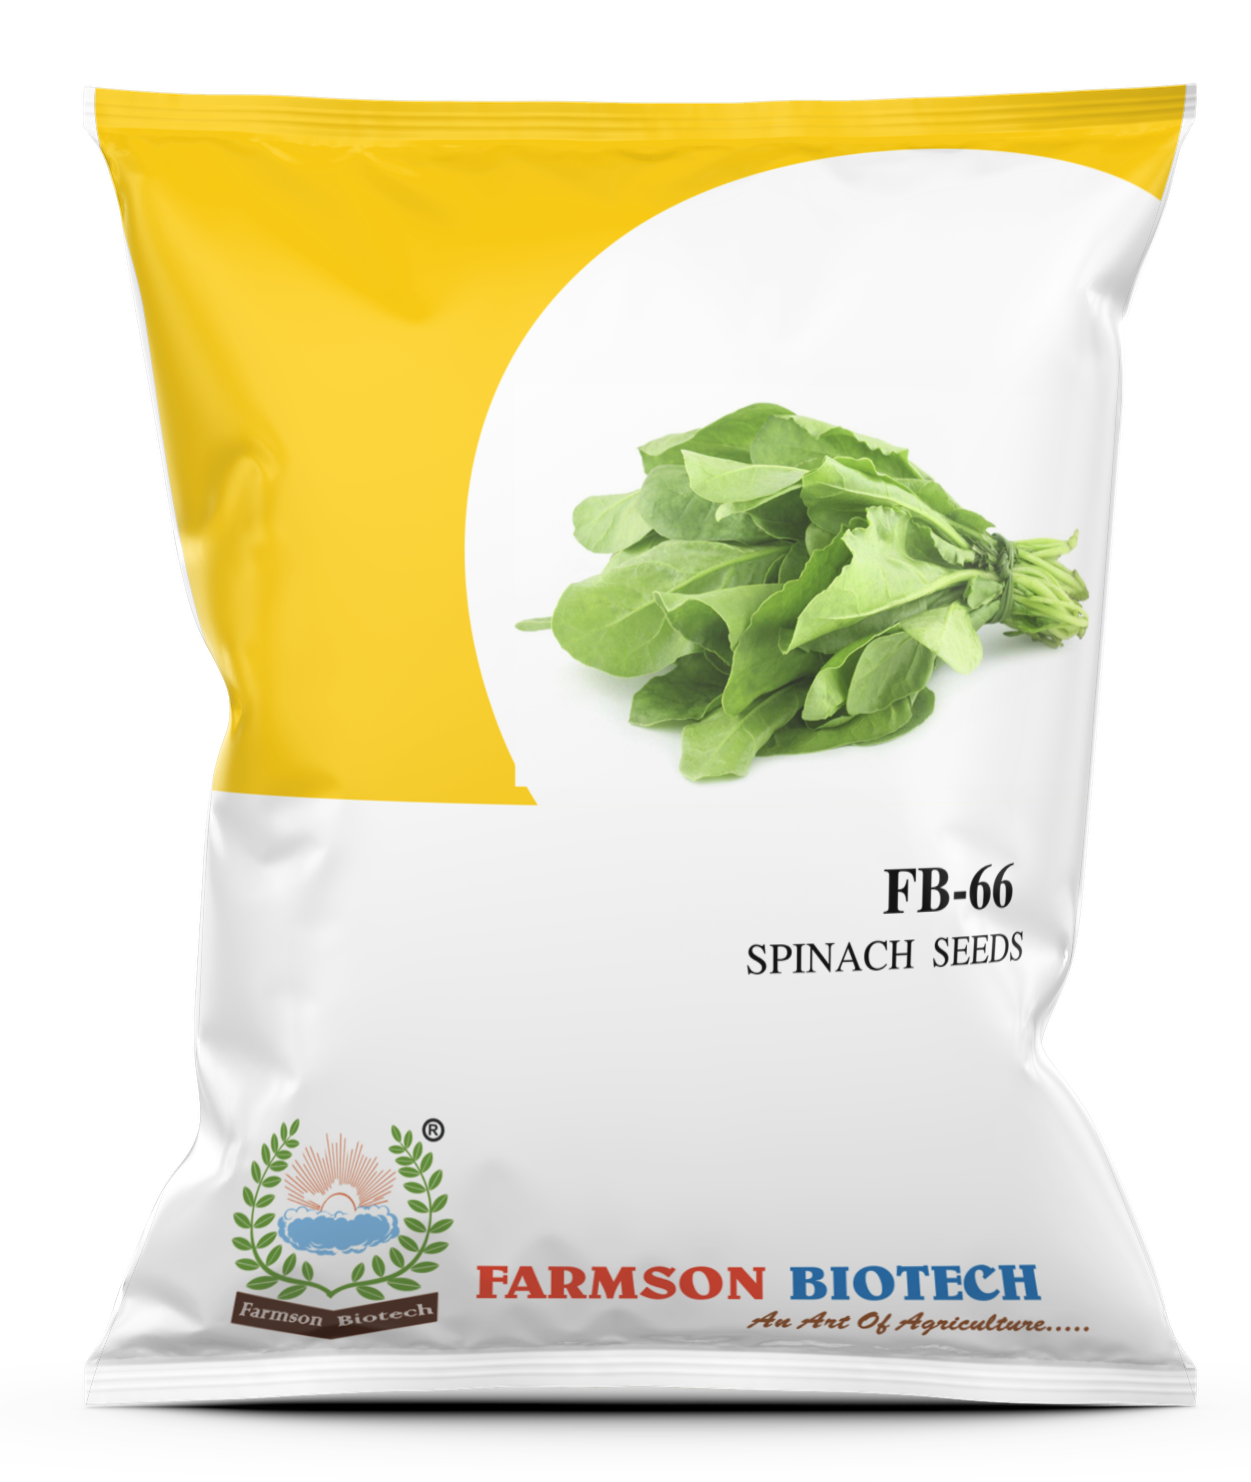 FB-66 SPINACH SEEDS